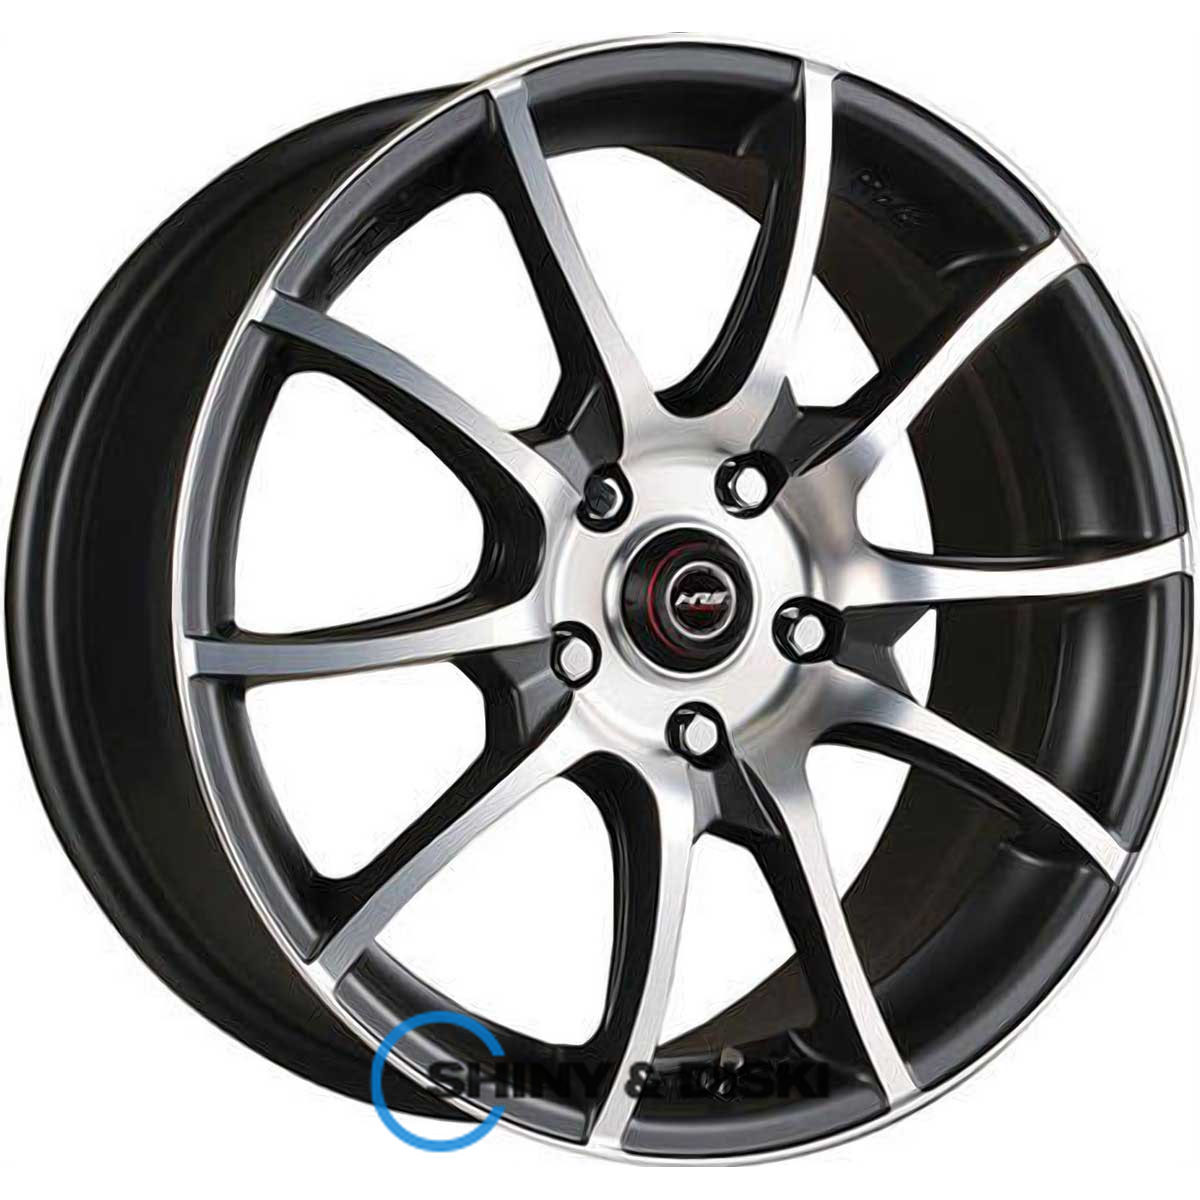 rs tuning h-470 bkfp r16 w7 pcd5x112 et40 dia66.6